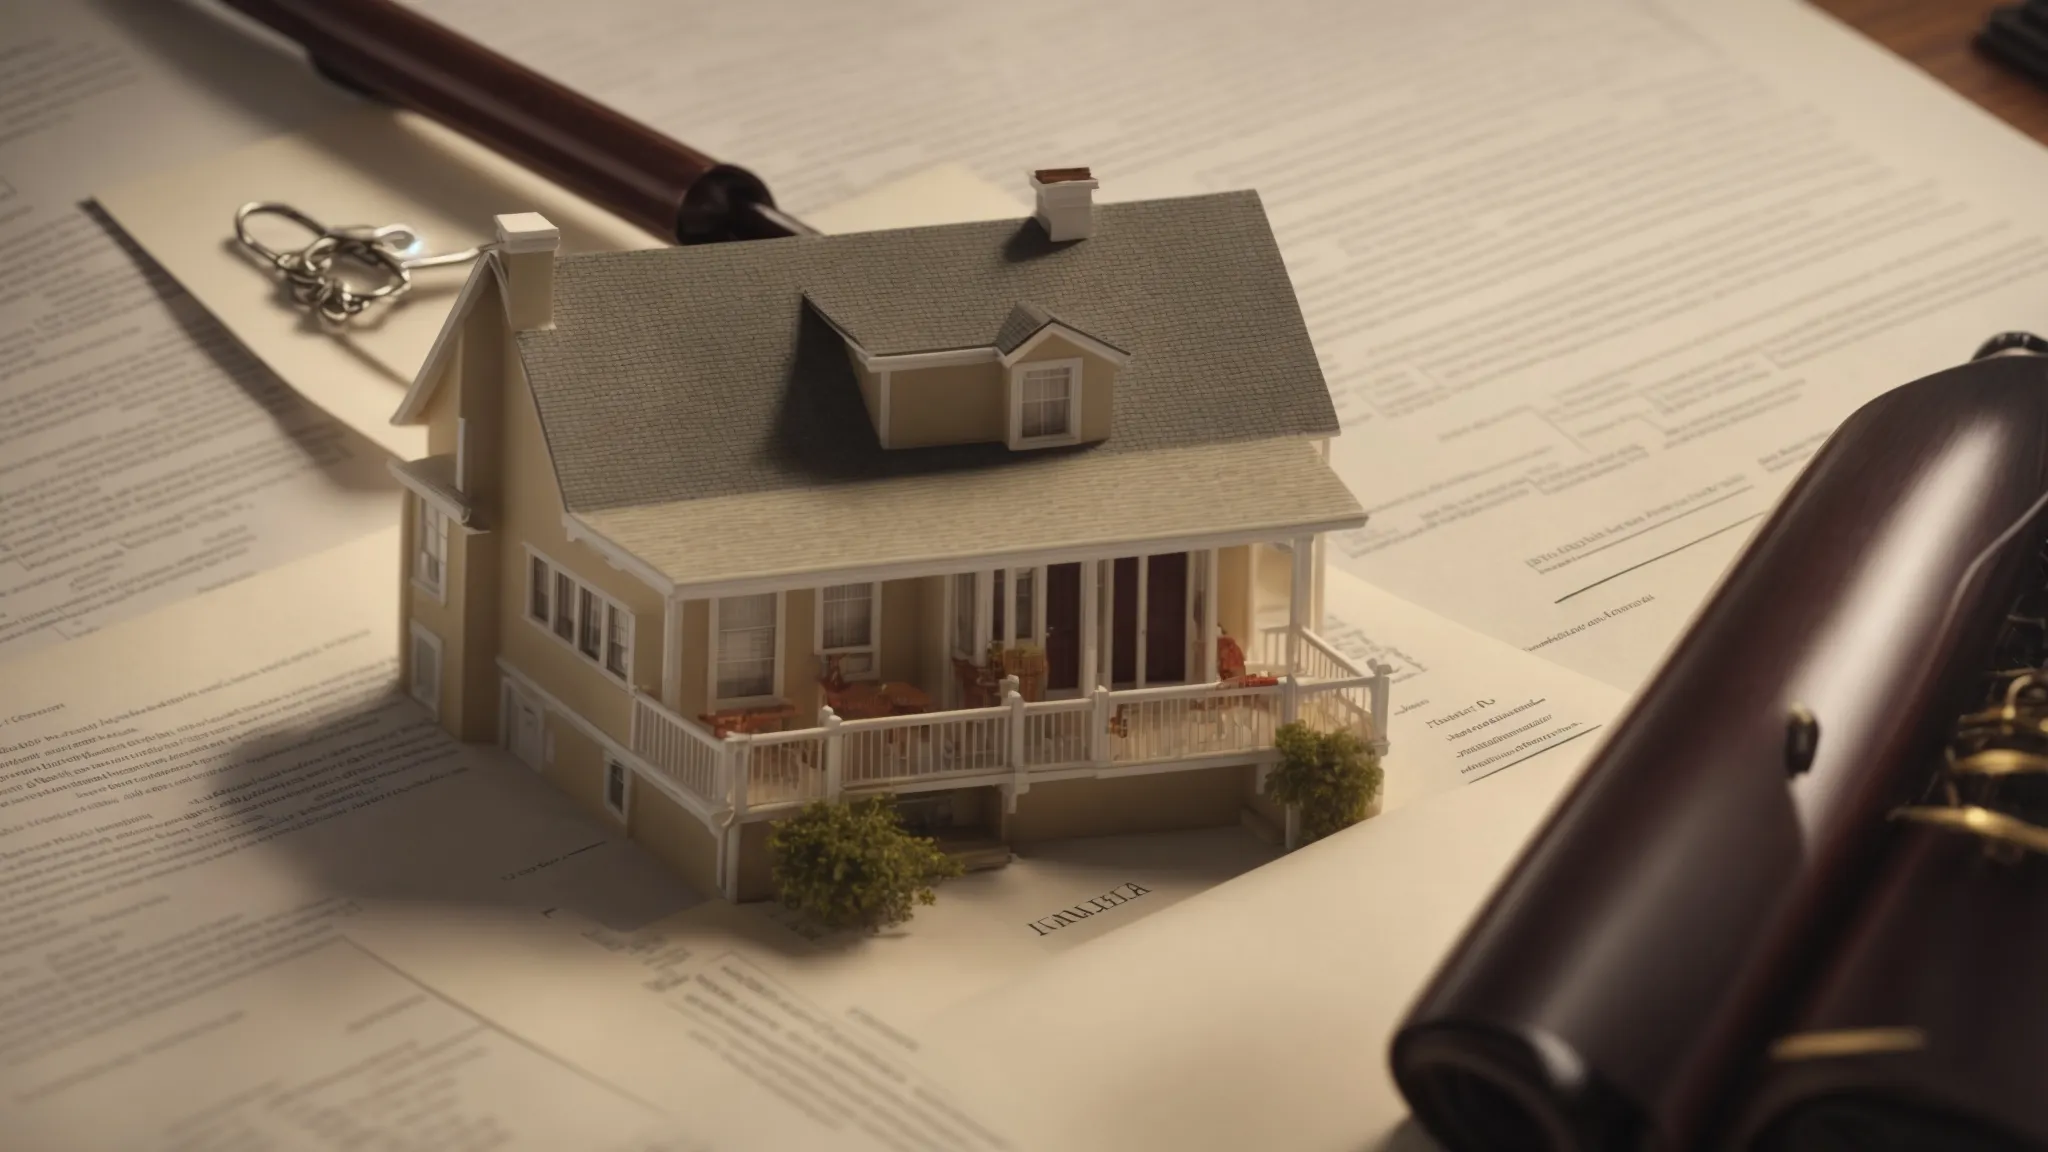 Create an image of a family home in Florida surrounded by legal documents, keys, and a sold sign, symbolizing the process of unlocking the value of an inherited house through the probate process.